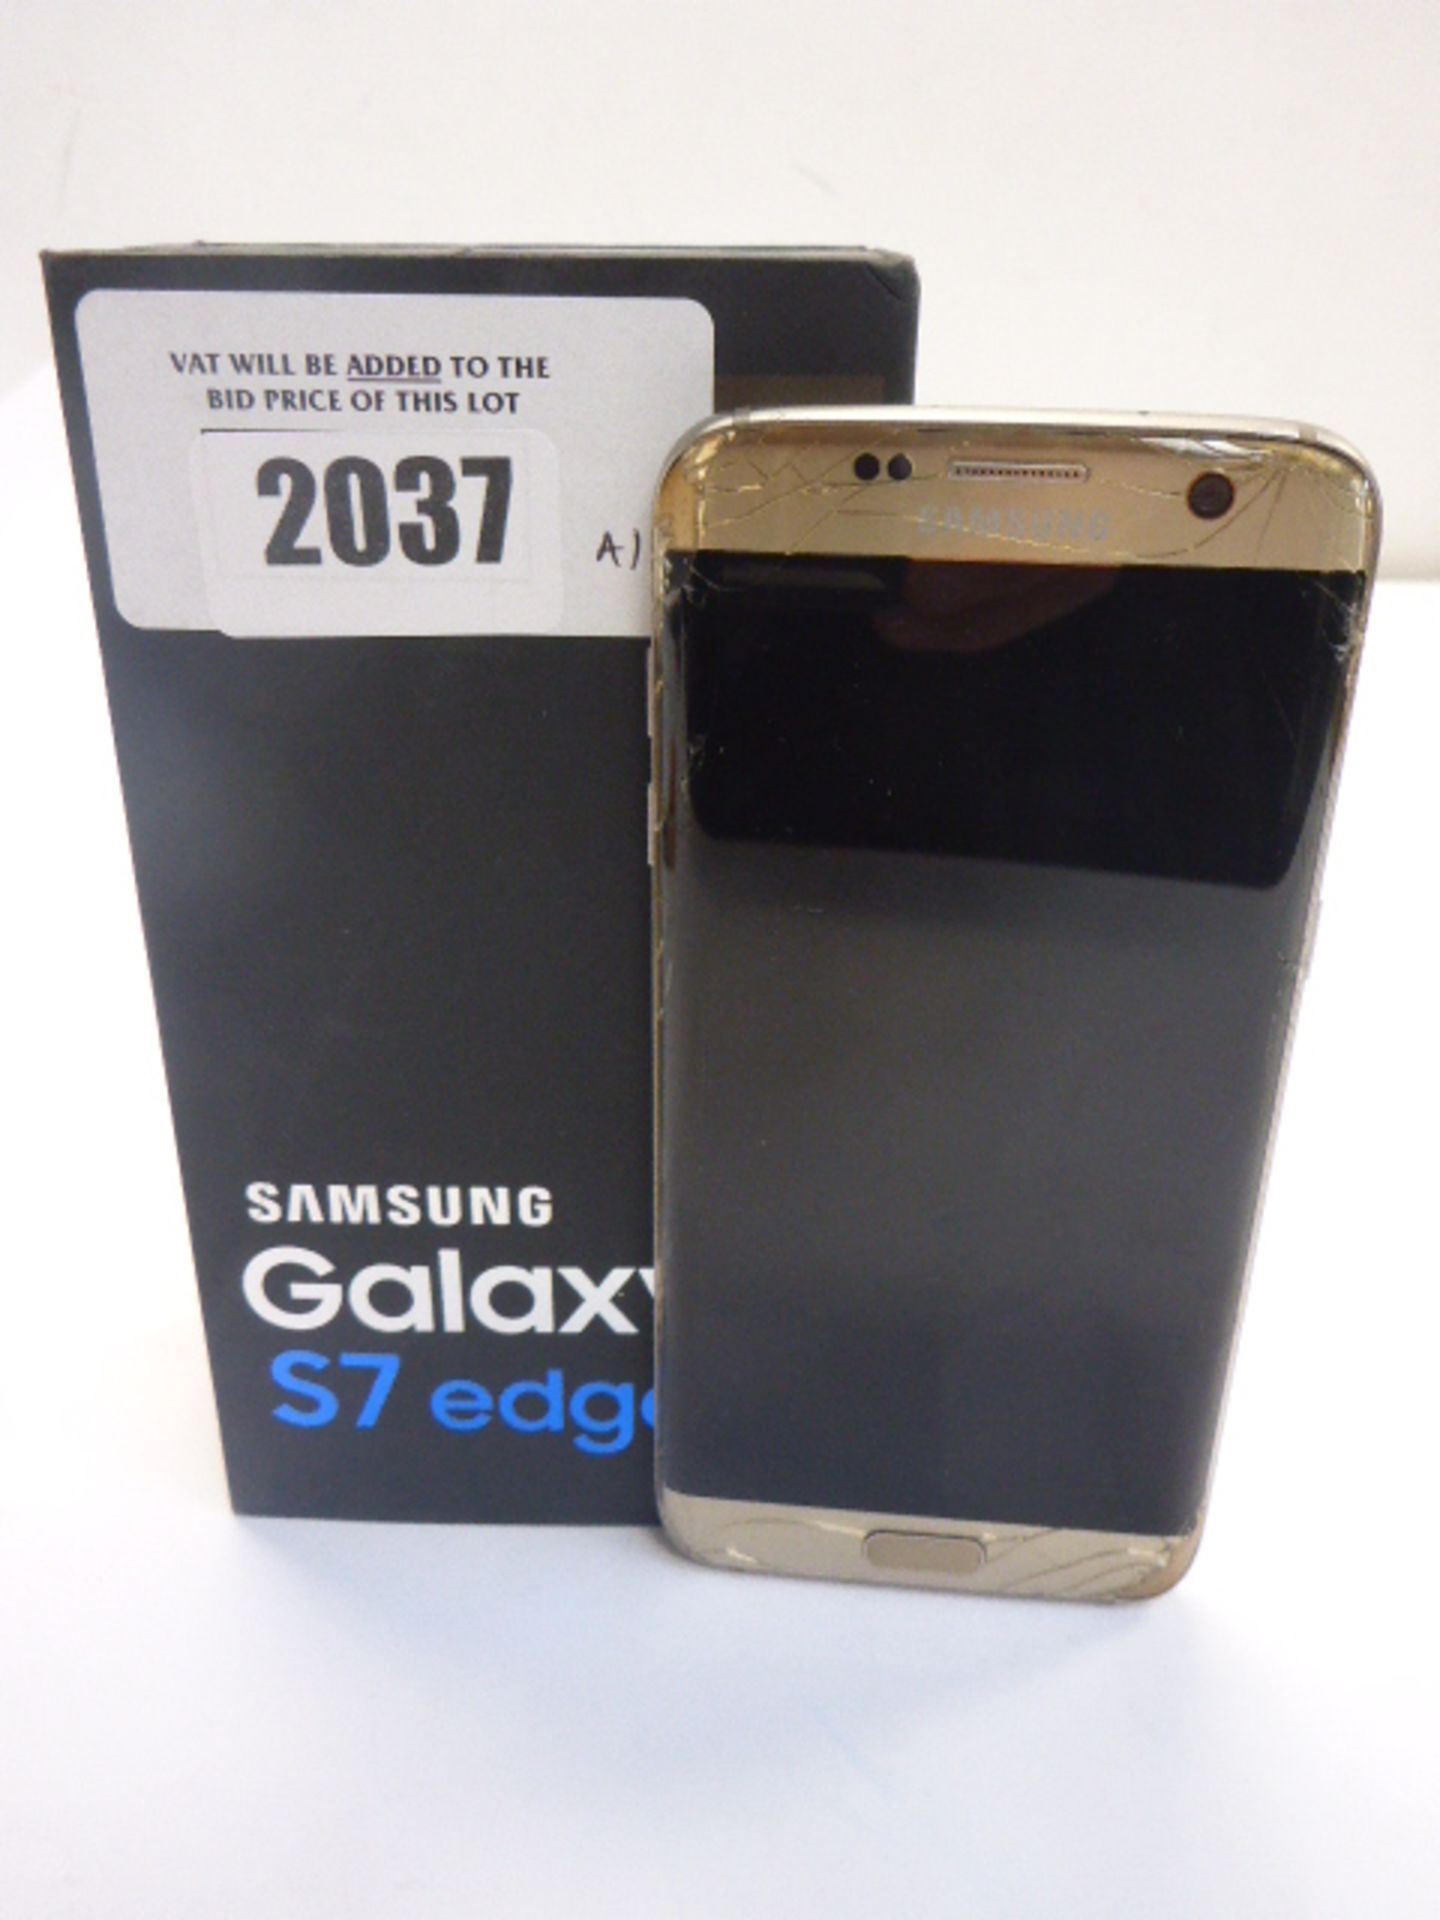 Samsung Galaxy S7 edge 32Gb mobile phone boxed, A/F Cracked screen.